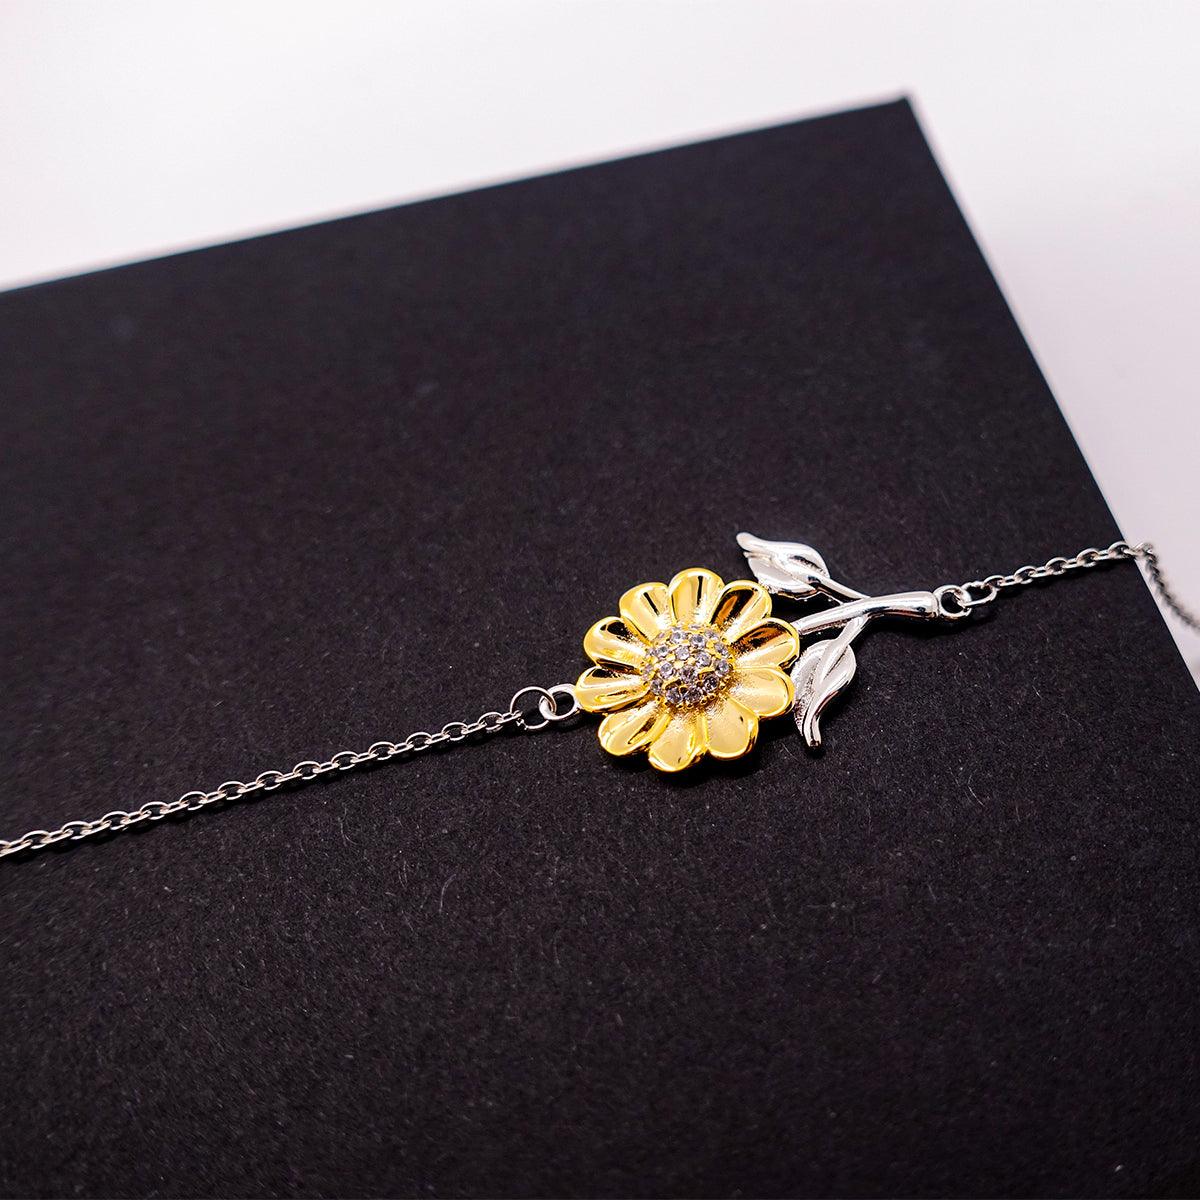 Remarkable Barber Gifts, Your dedication and hard work, Inspirational Birthday Christmas Unique Sunflower Bracelet For Barber, Coworkers, Men, Women, Friends - Mallard Moon Gift Shop